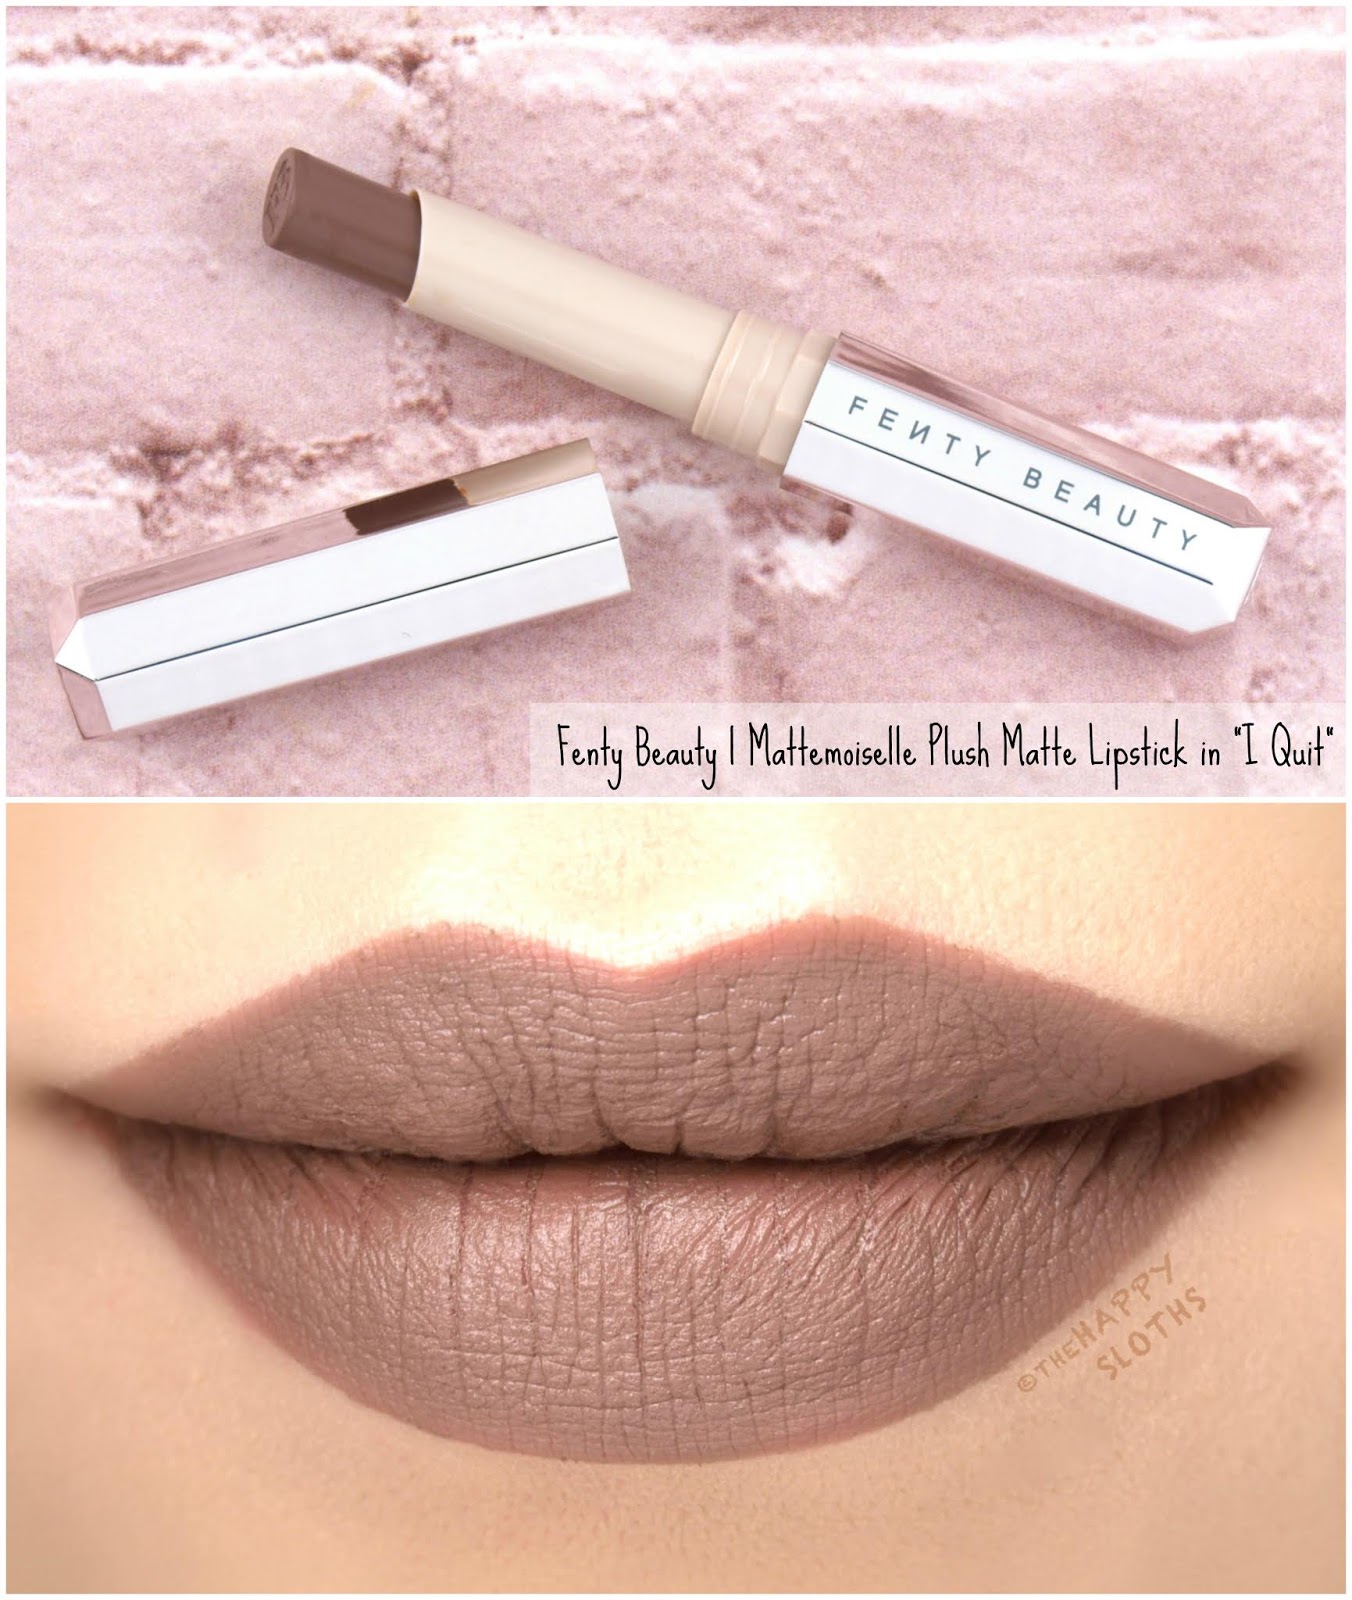 Fenty Beauty by Rihanna | Mattemoiselle Plush Matte Lipstick in "I Quit": Review and Swatches